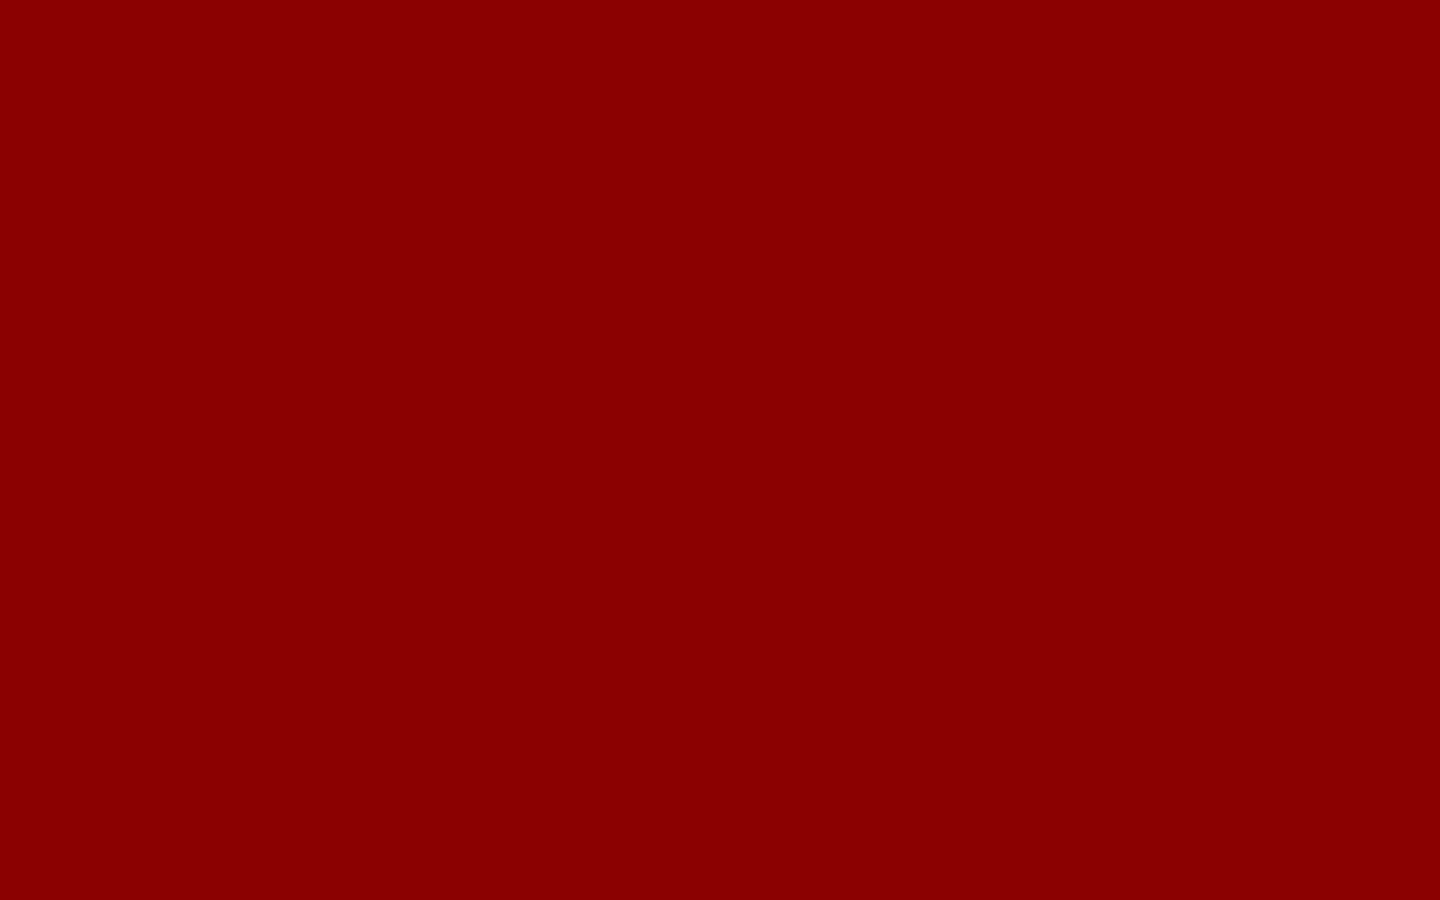 Gallery For Gt Solid Dark Red Wallpaper